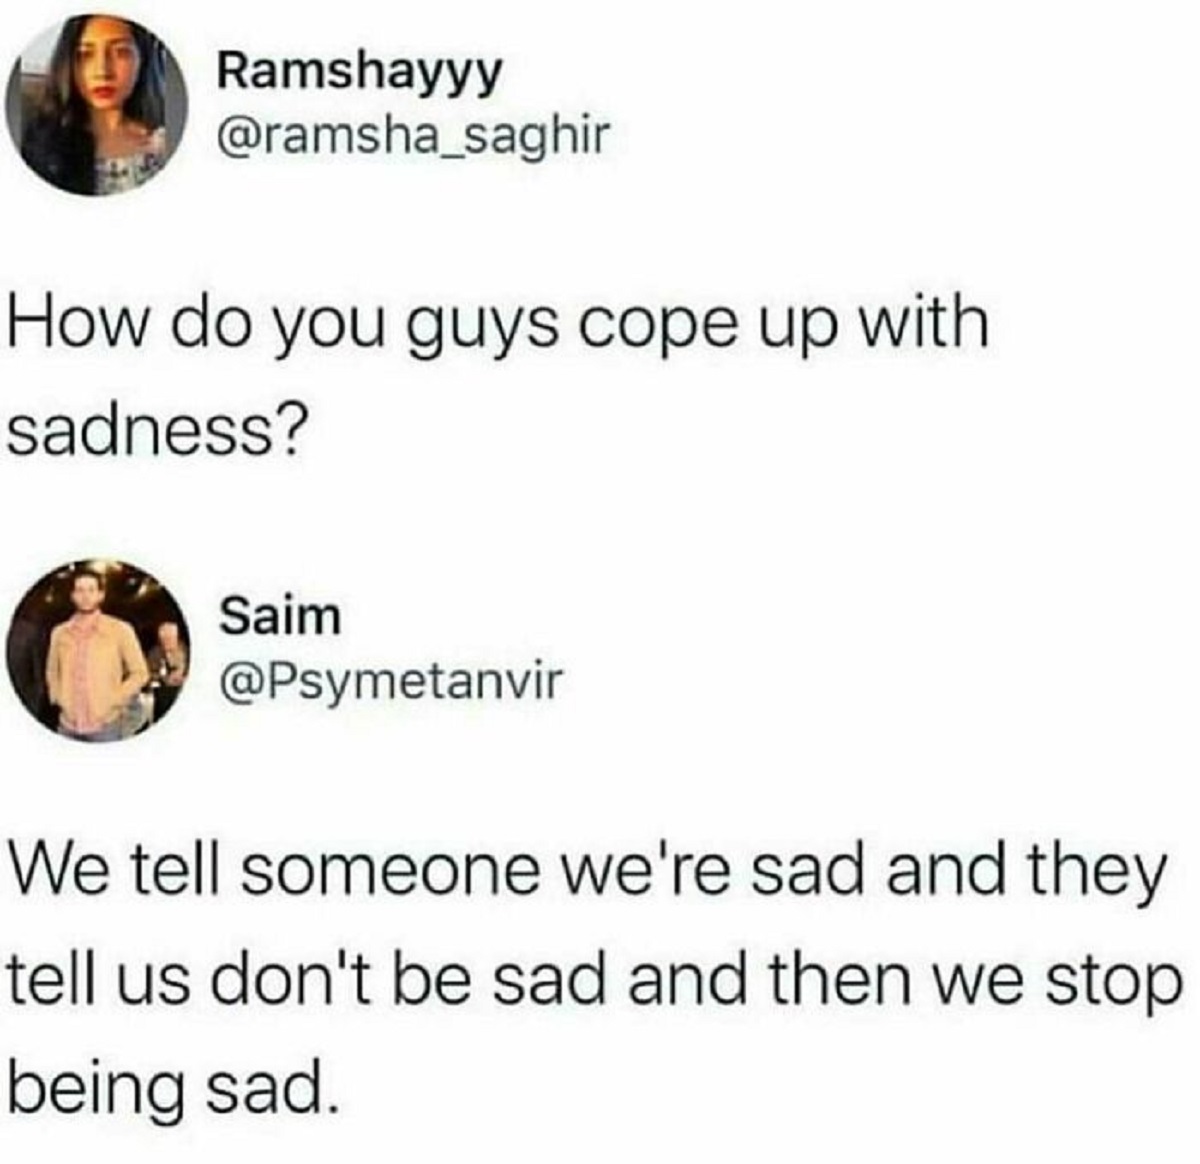 Ramshayyy How do you guys cope up with sadness? Saim We tell someone we're sad and they tell us don't be sad and then we stop being sad.